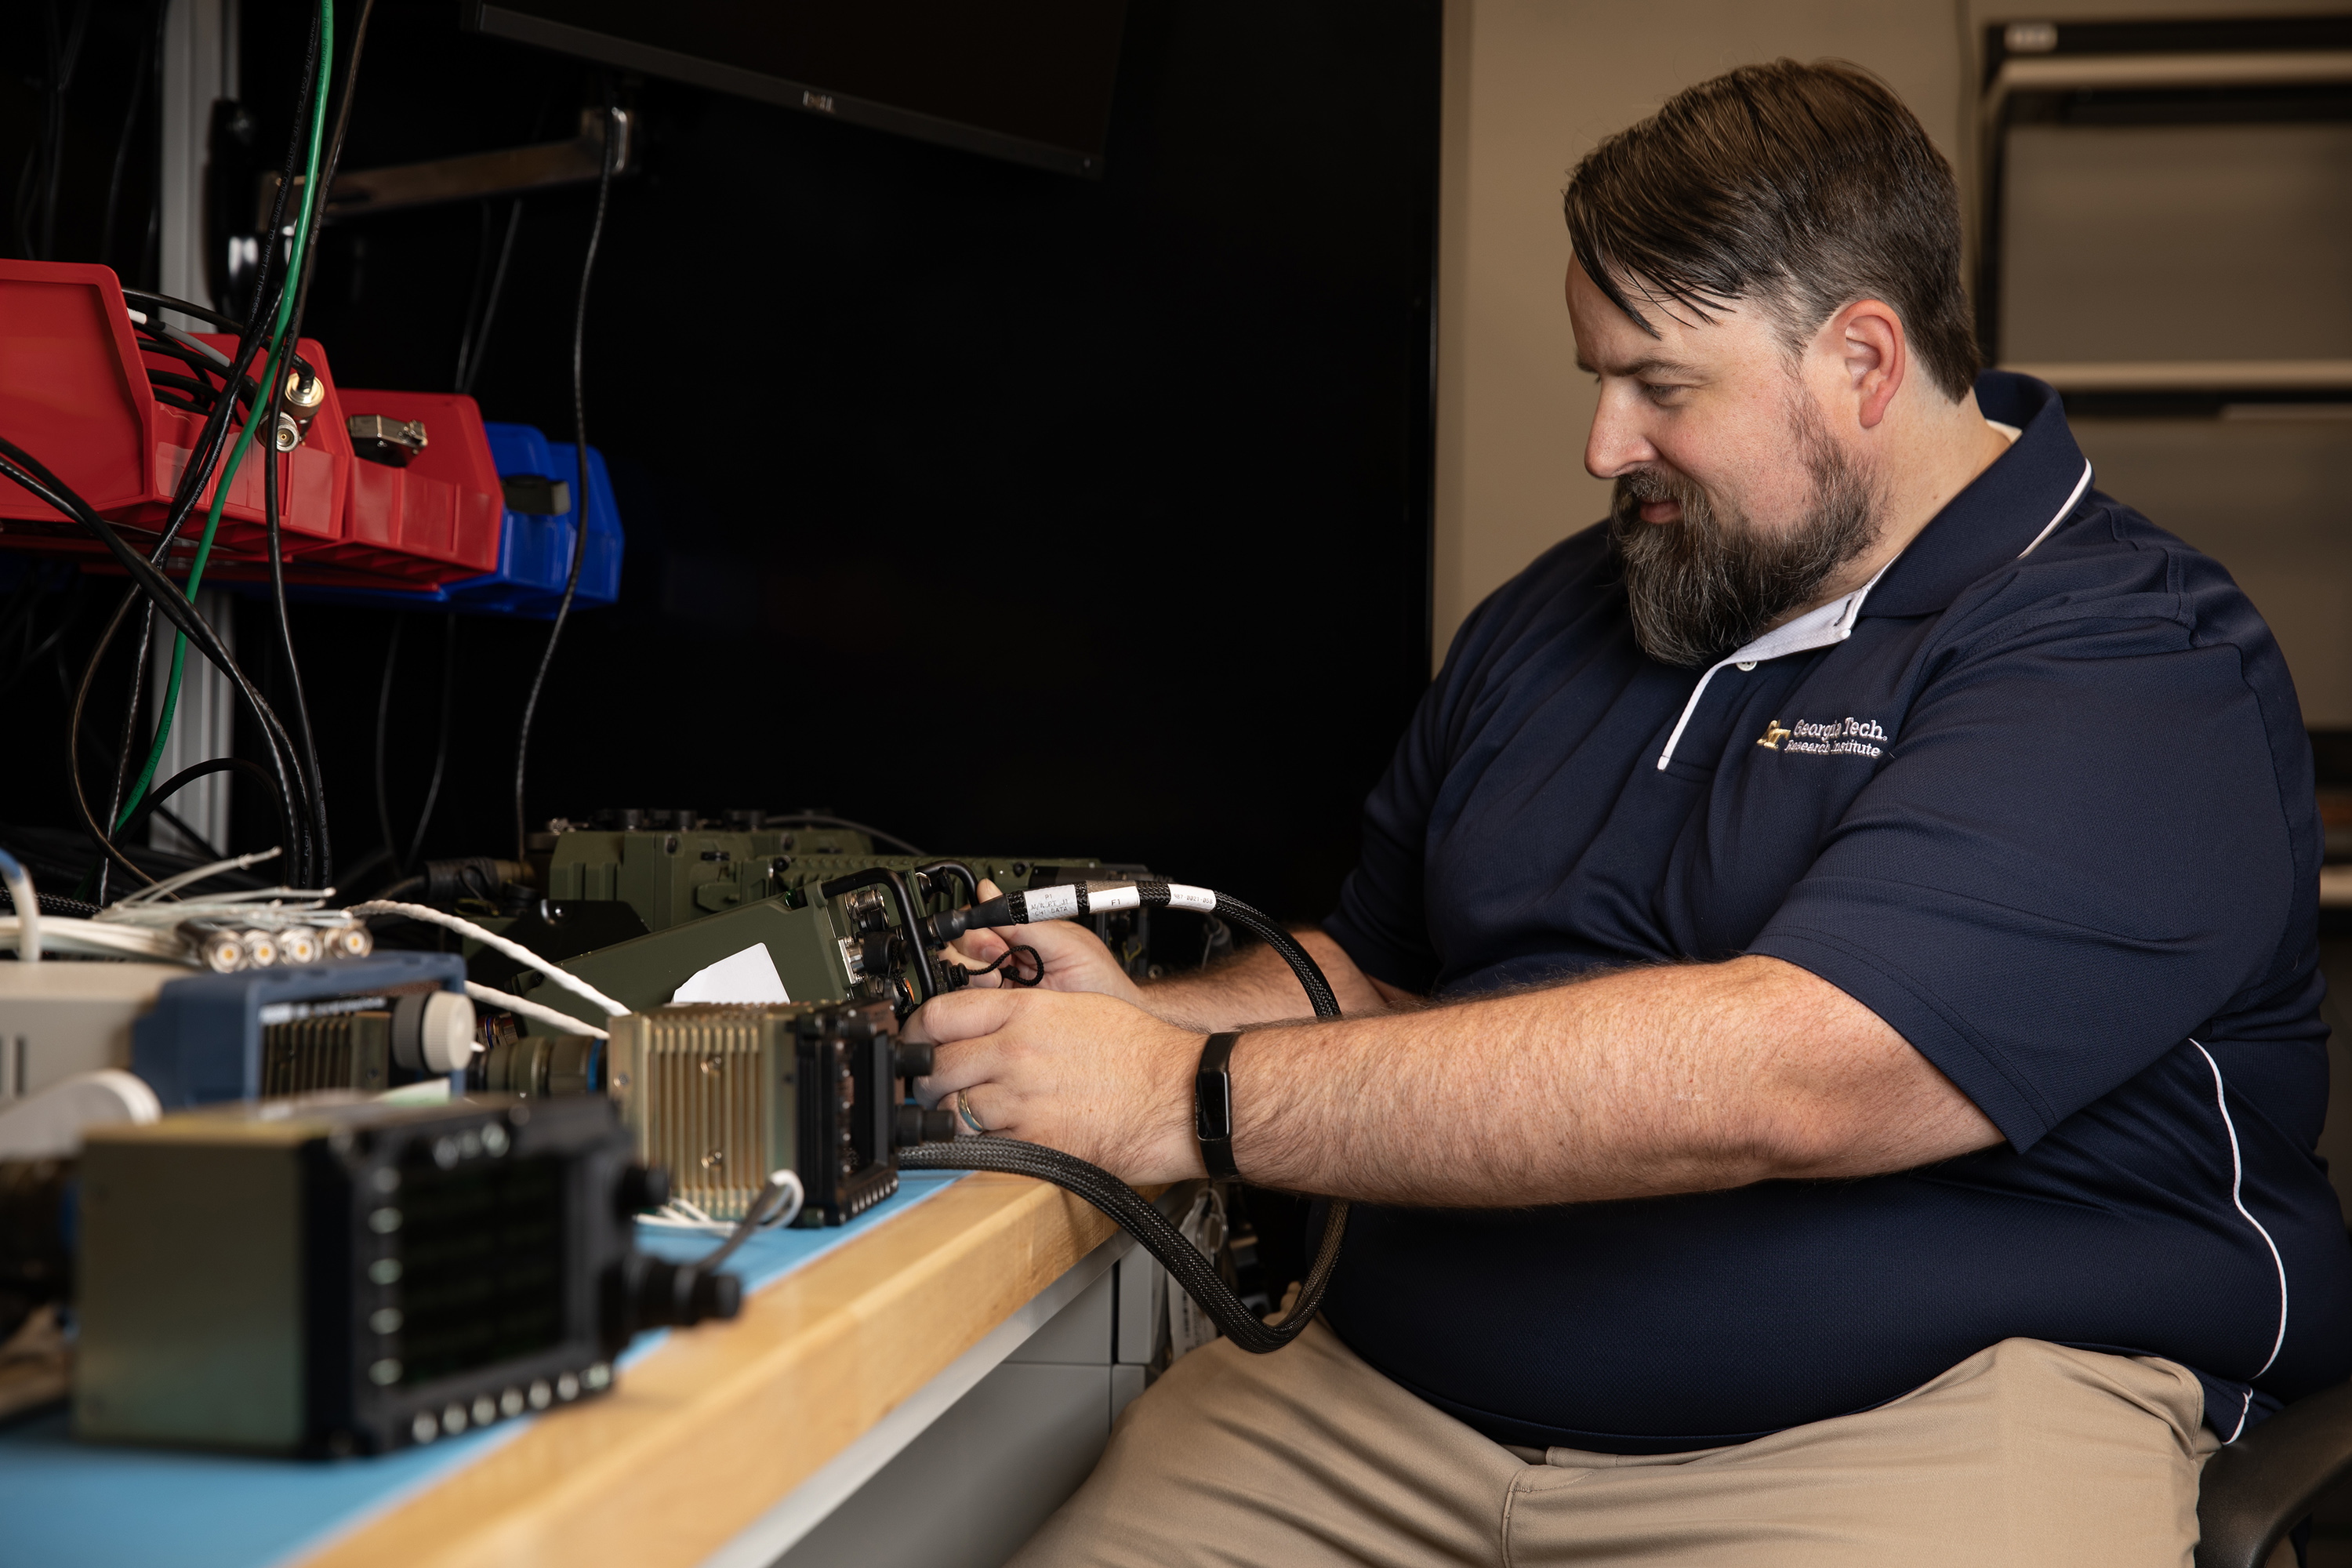 GTRI researcher reconfigures an Air Ground Networking Radio.